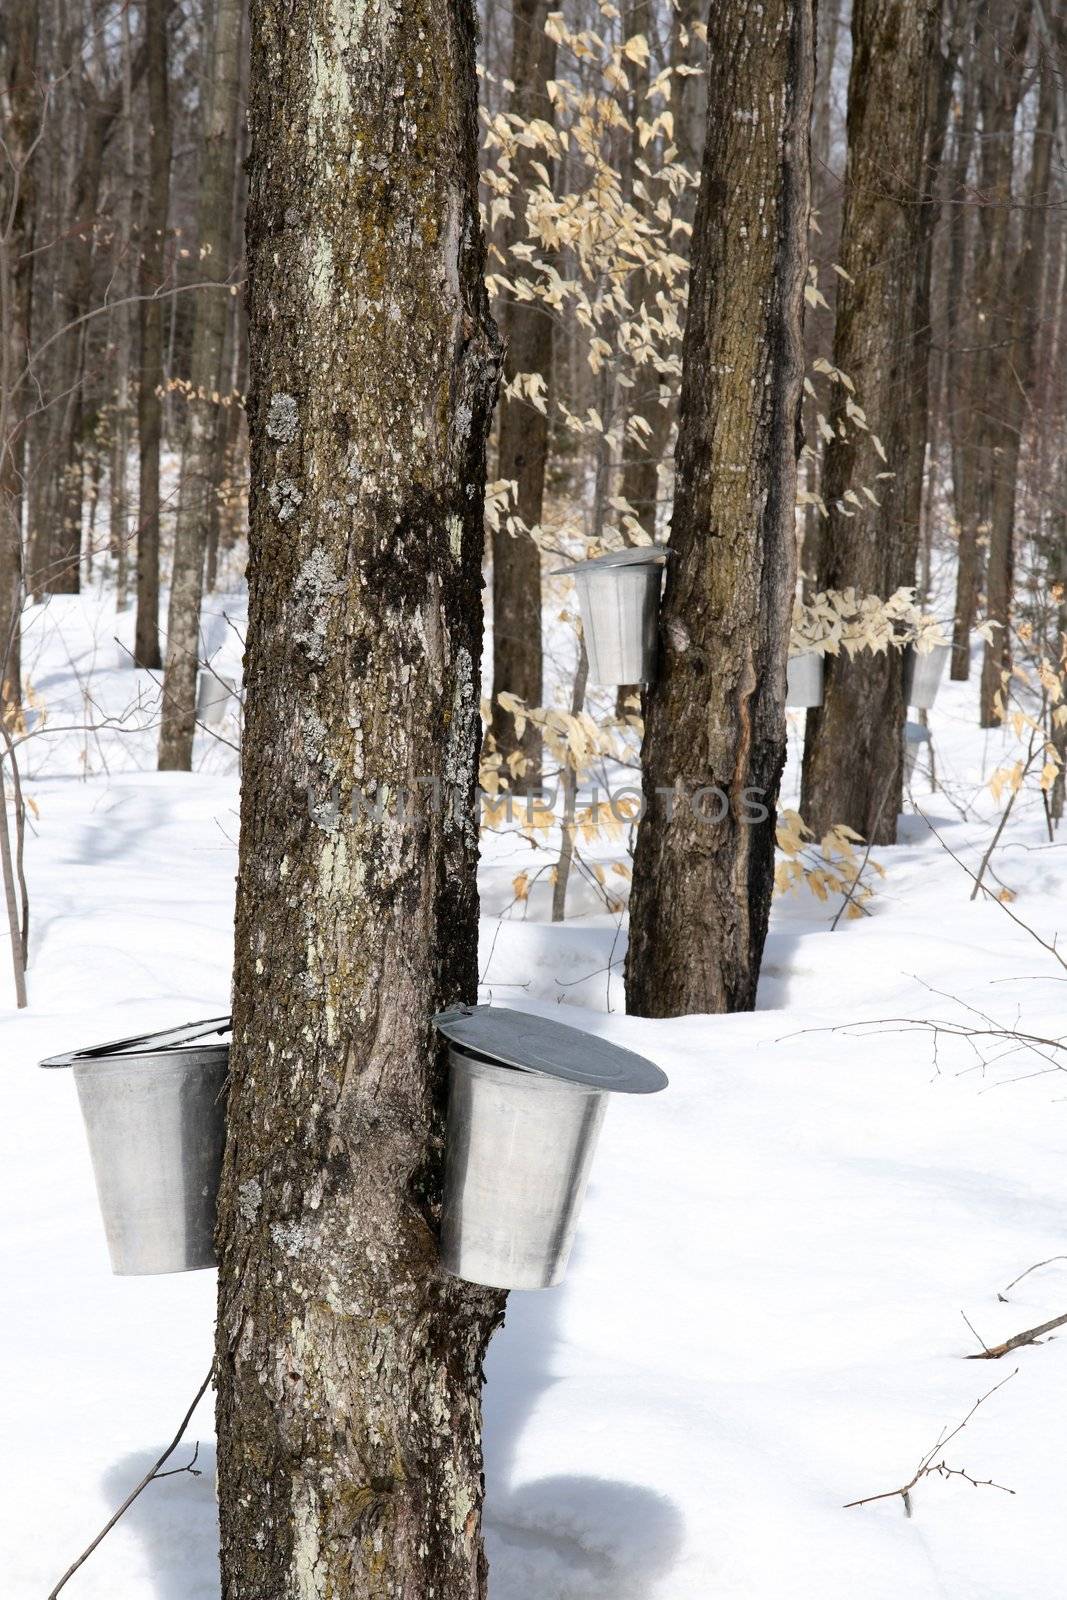 Spring forest during maple syrup season. Buckets for collecting maple sap.